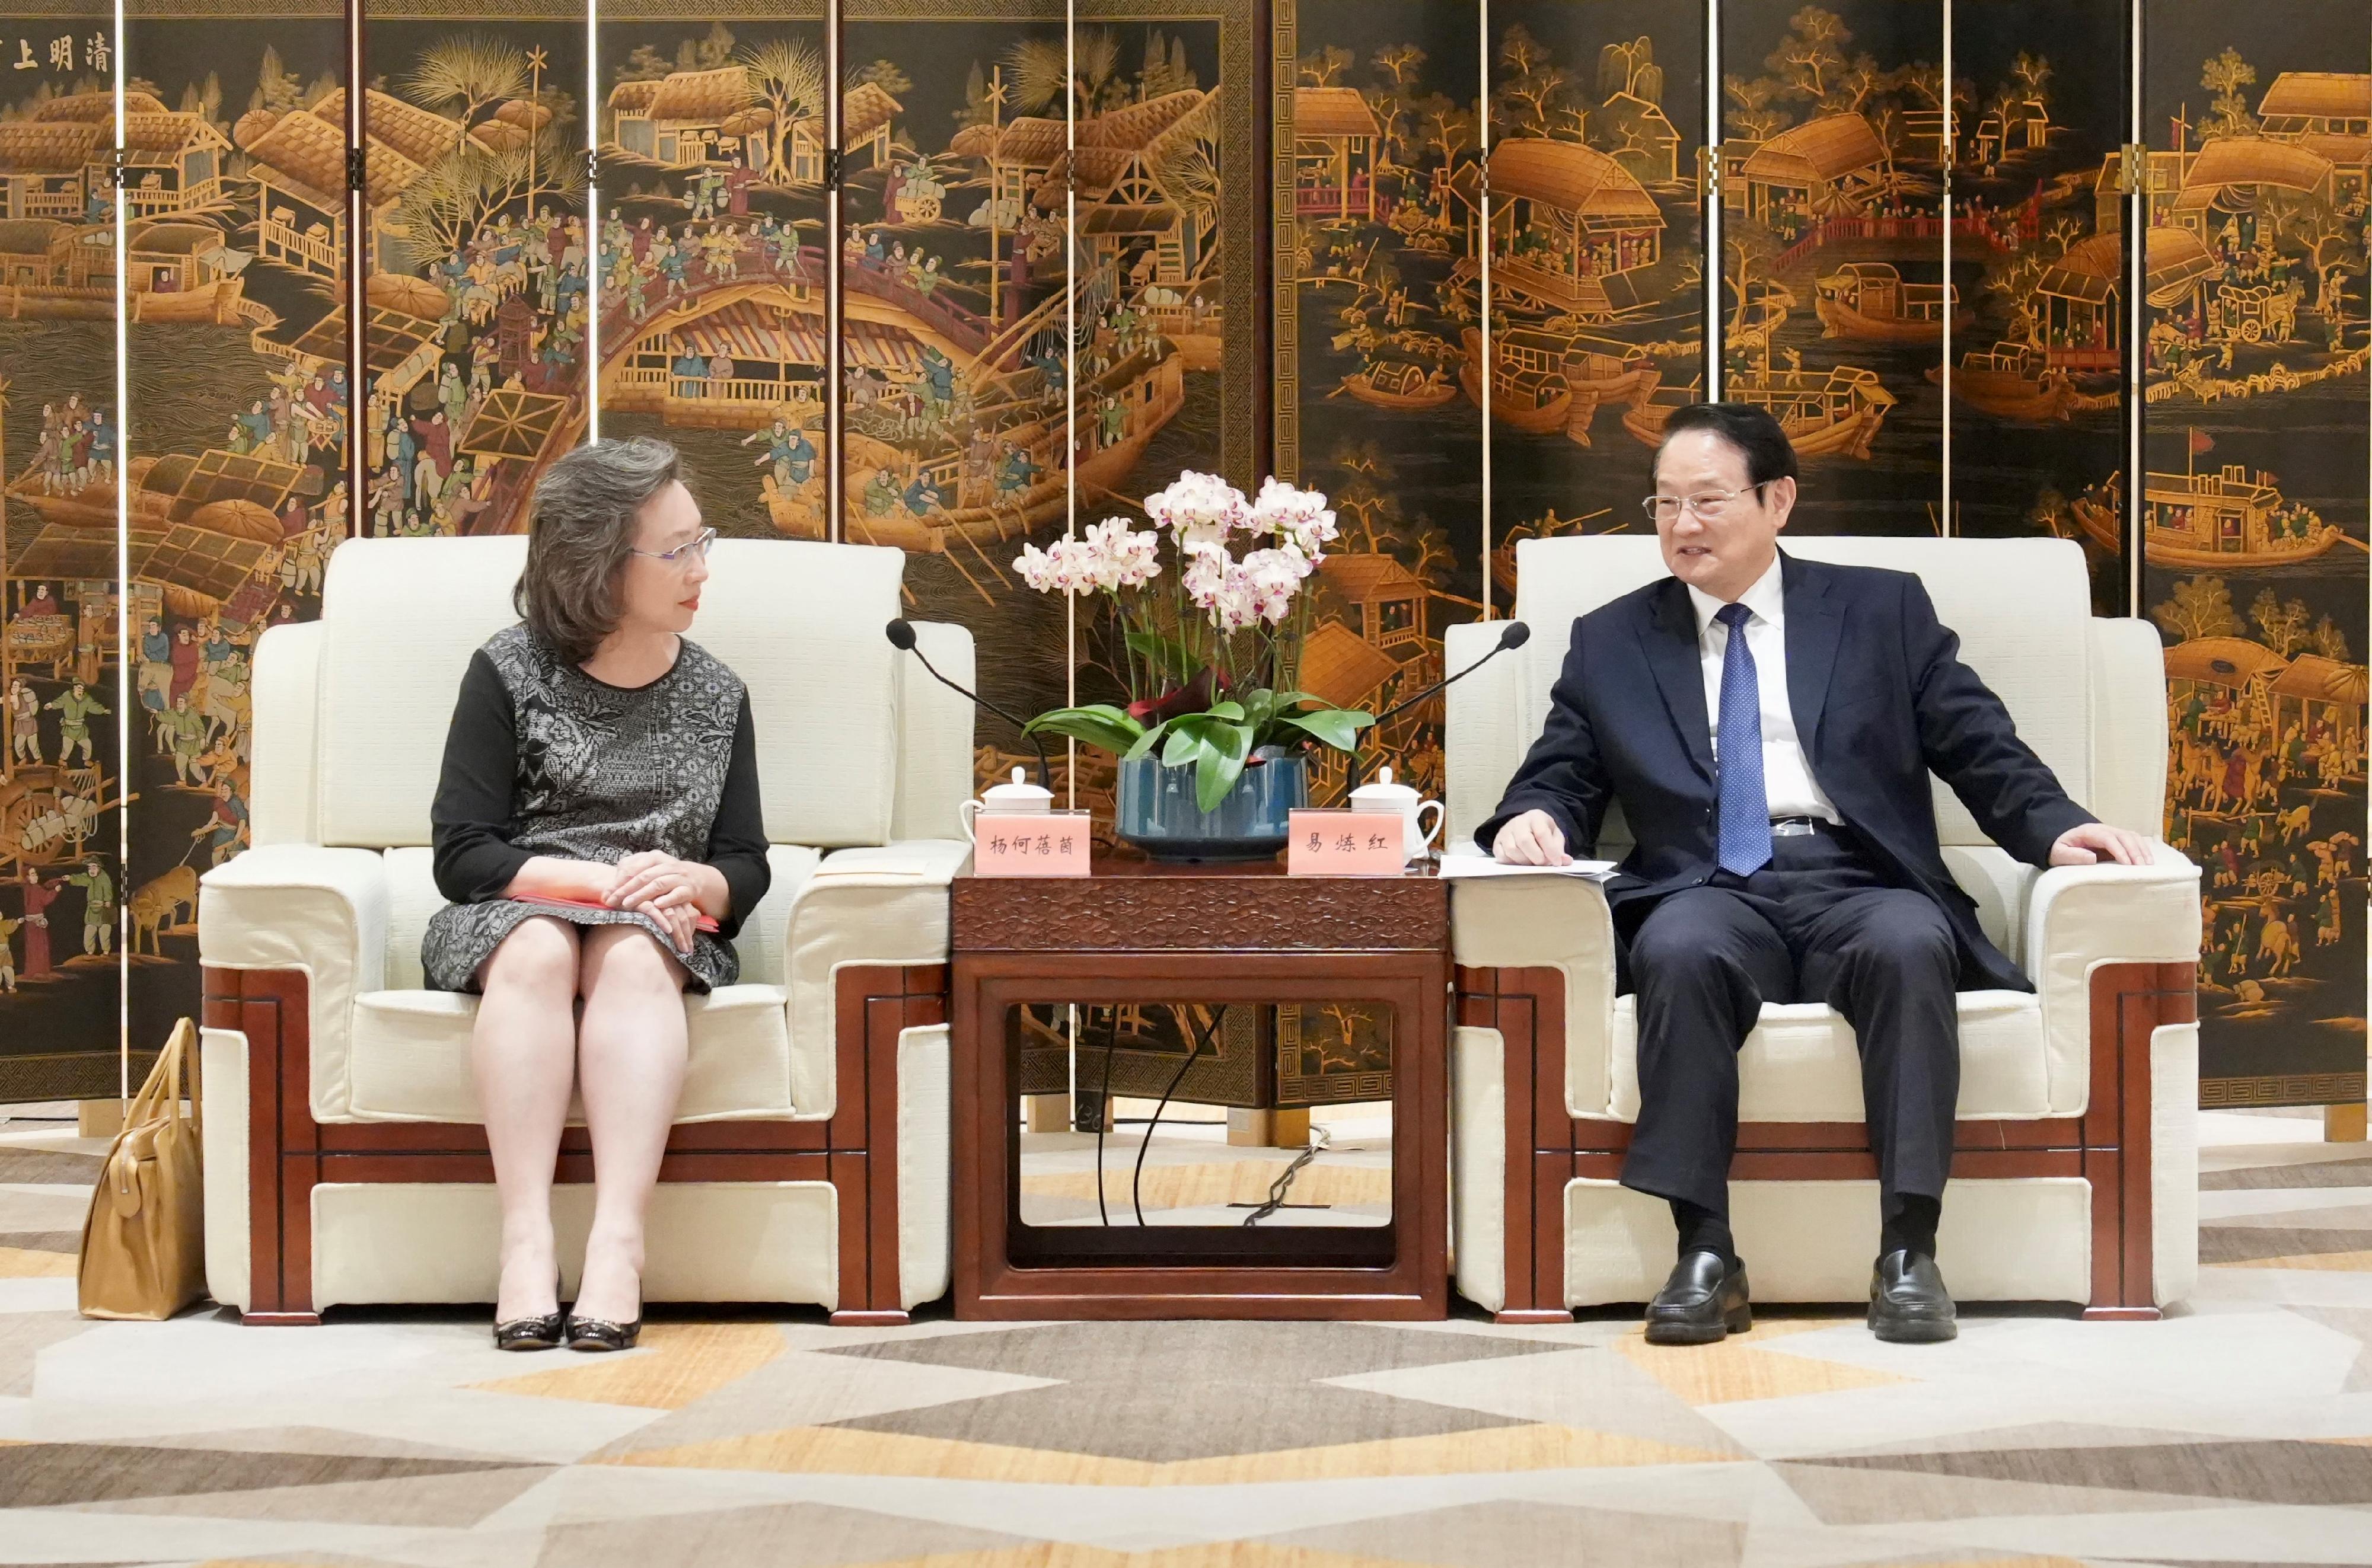 The delegation of Permanent Secretaries and Heads of Departments of the Hong Kong Special Administrative Region Government on a study and duty visit led by the Secretary for the Civil Service, Mrs Ingrid Yeung (left), today (June 29) called on the Secretary of the CPC Zhejiang Provincial Committee, Mr Yi Lianhong (right).